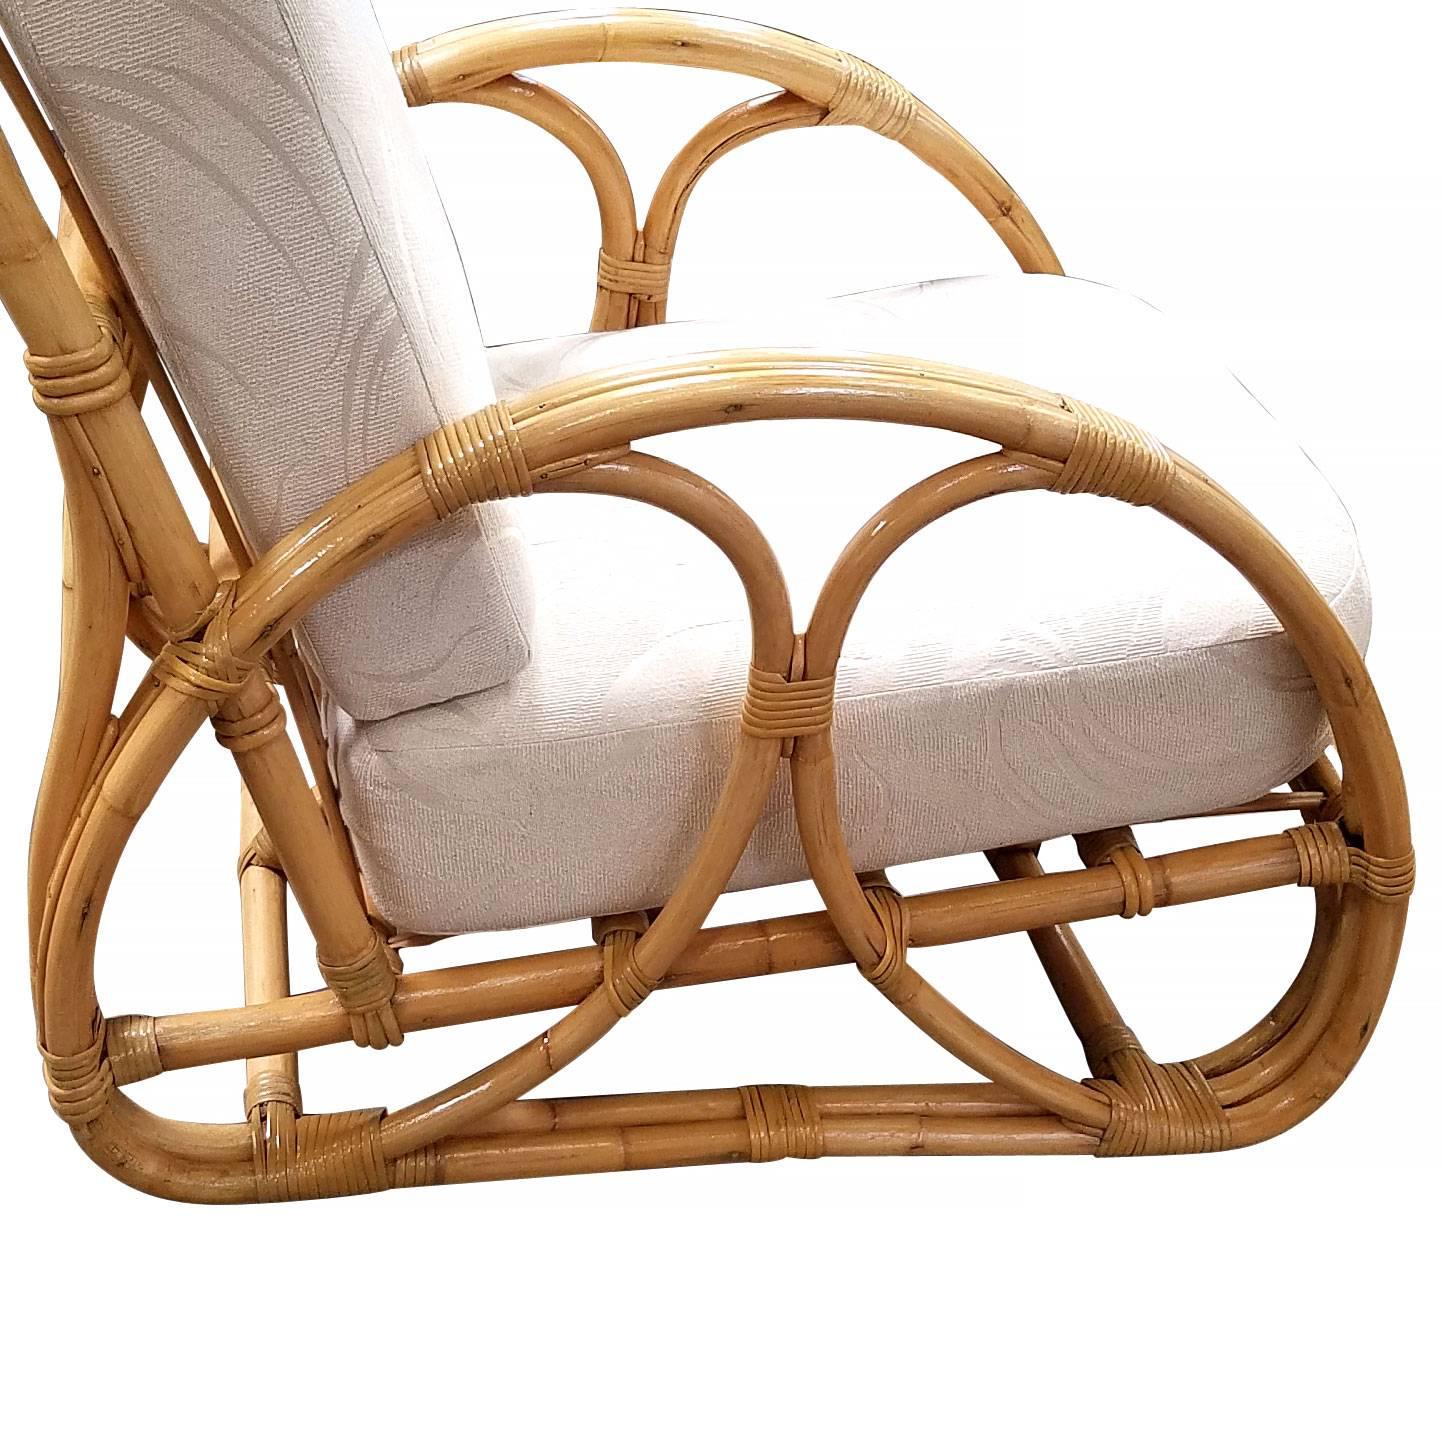 Shirley Ritts style two strand "Double Hoop" Rattan lounge chair featuring two strand rattan arms with double hoop accents in the center. Stick Rattan strips and wicker wrapping ordain the frame of this chair.

Refinished to new for